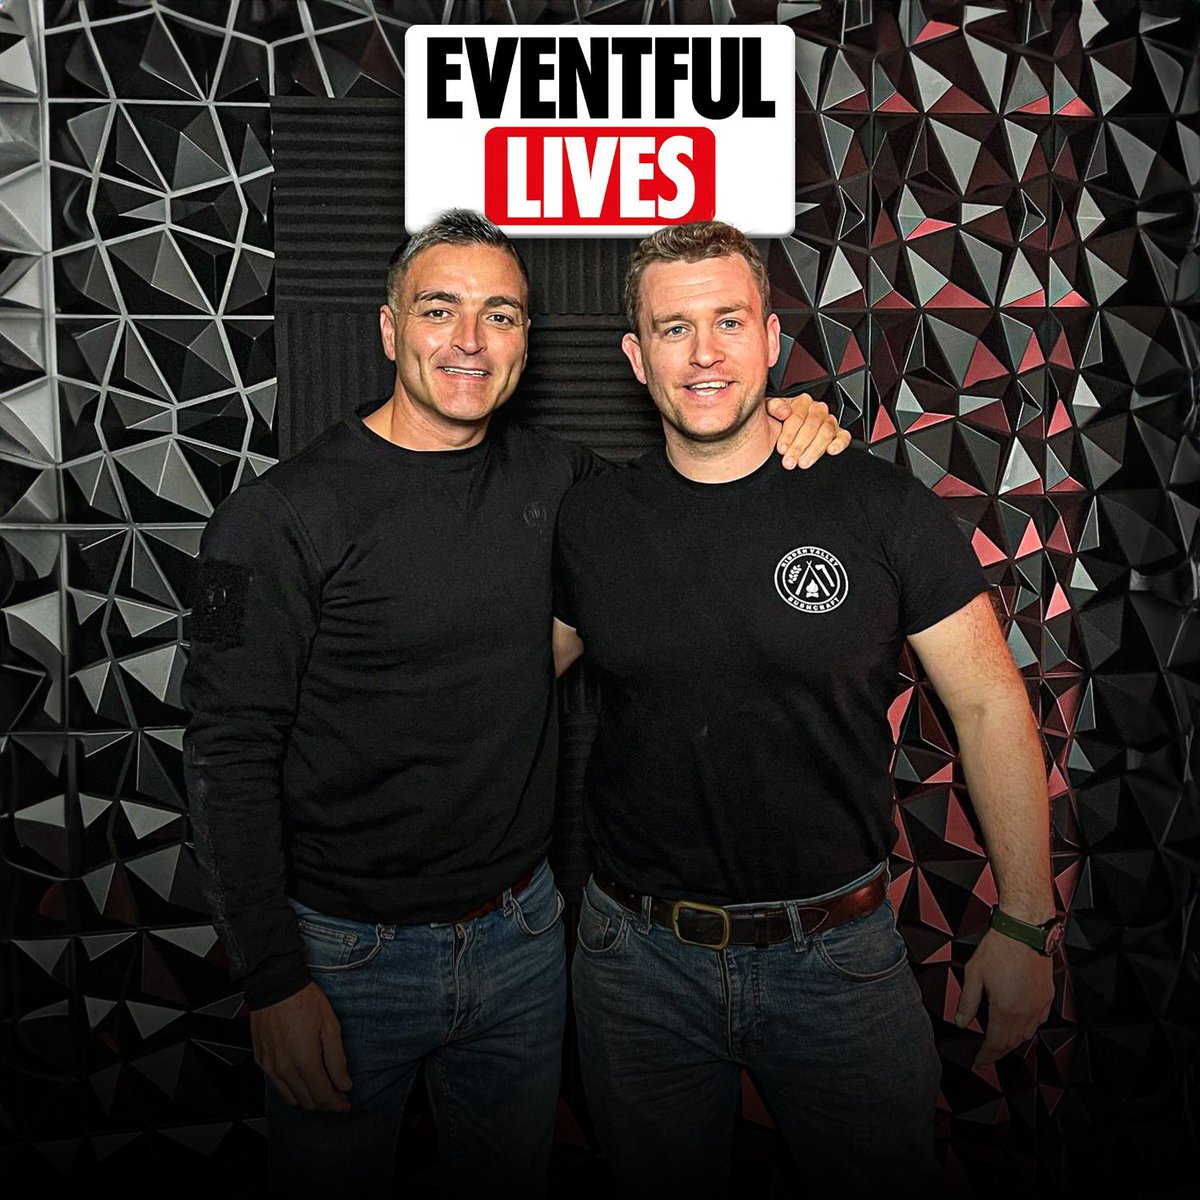 HAVE YOU HEARD the Eventful Lives Podcast that has just been released with @DodgeWoodall and myself ?? open.spotify.com/episode/09oOzO… Sharing the journey to @HVBushcraft from life in the @RoyalMarines to being diagnosed with #cptsd after my last tour of duty. Reflecting and speaking